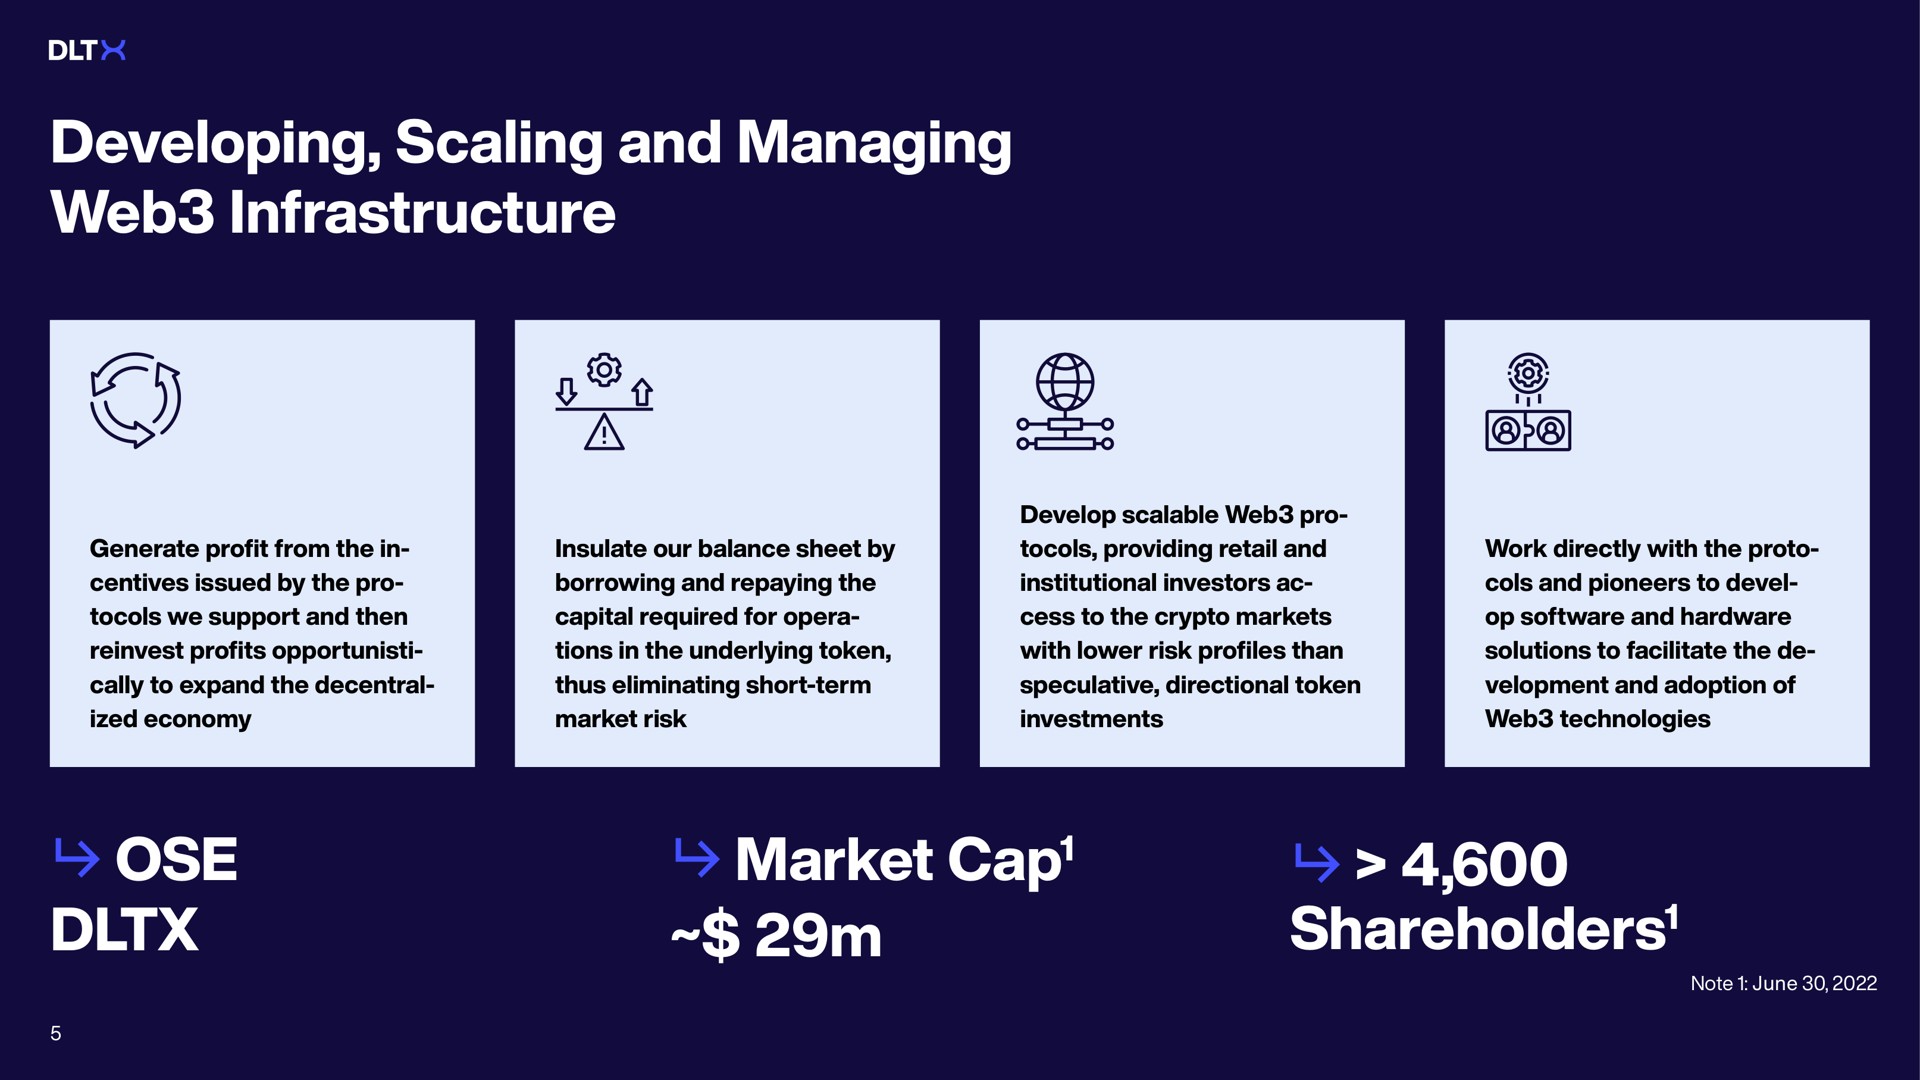 developing scaling and managing web infrastructure ose market cap shareholders generate profit from the in issued by the pro we support then reinvest profits to expand the economy insulate our balance sheet by borrowing repaying the capital required for opera in the underlying token thus eliminating short term risk develop scalable pro providing retail institutional investors cess to the markets with lower risk profiles than speculative directional token investments work directly with the proto cols pioneers to hardware solutions to facilitate the adoption of technologies cap was shareholders note june | DLTx